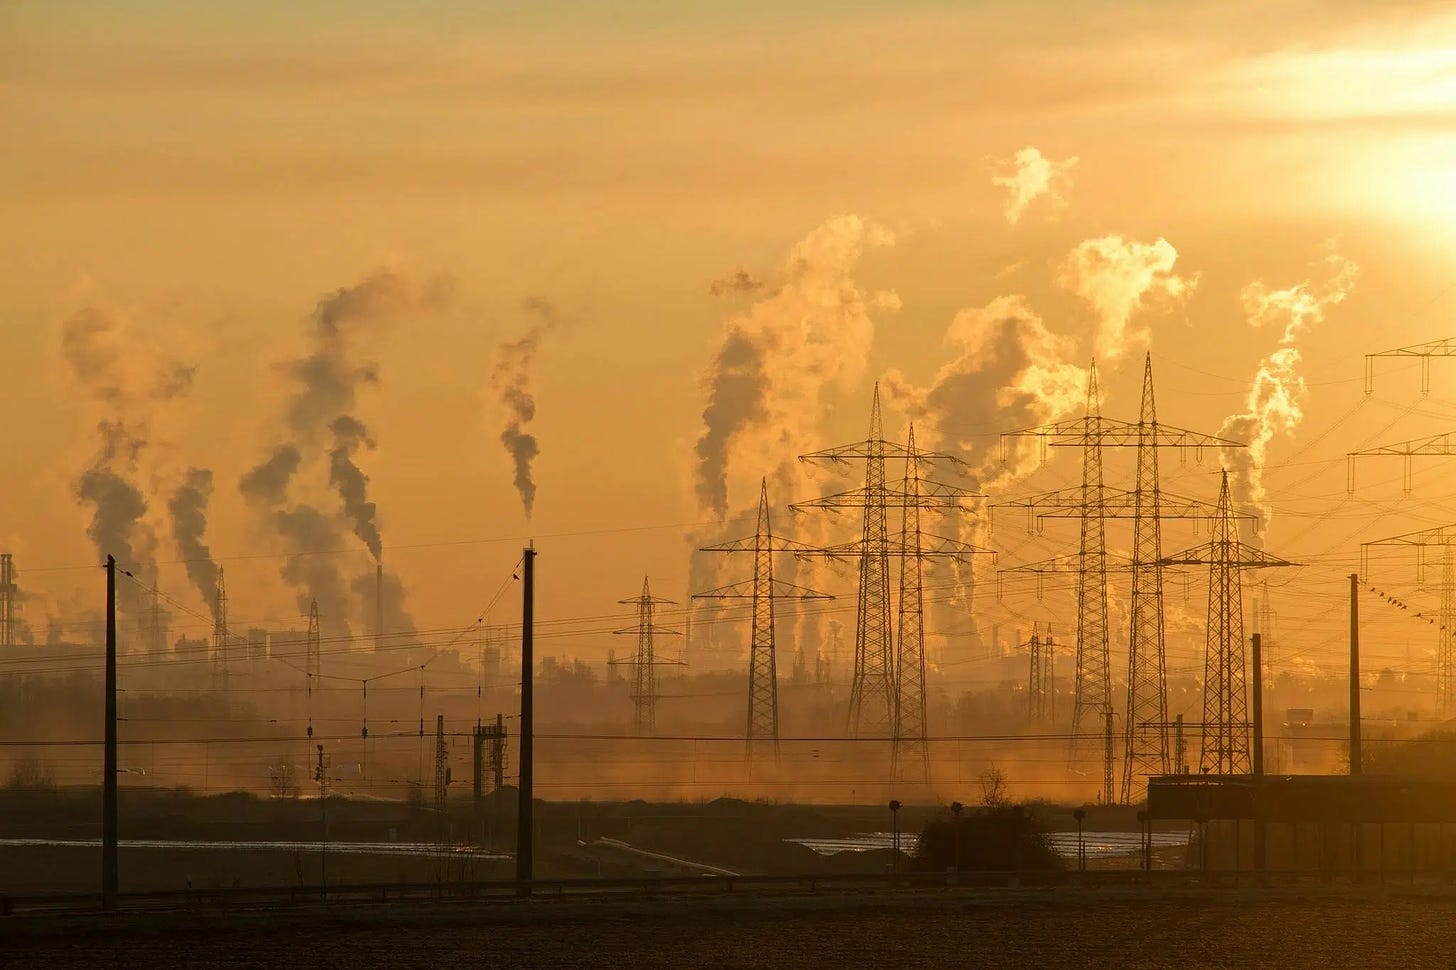 An image of smokestacks and electric towers during sunset.